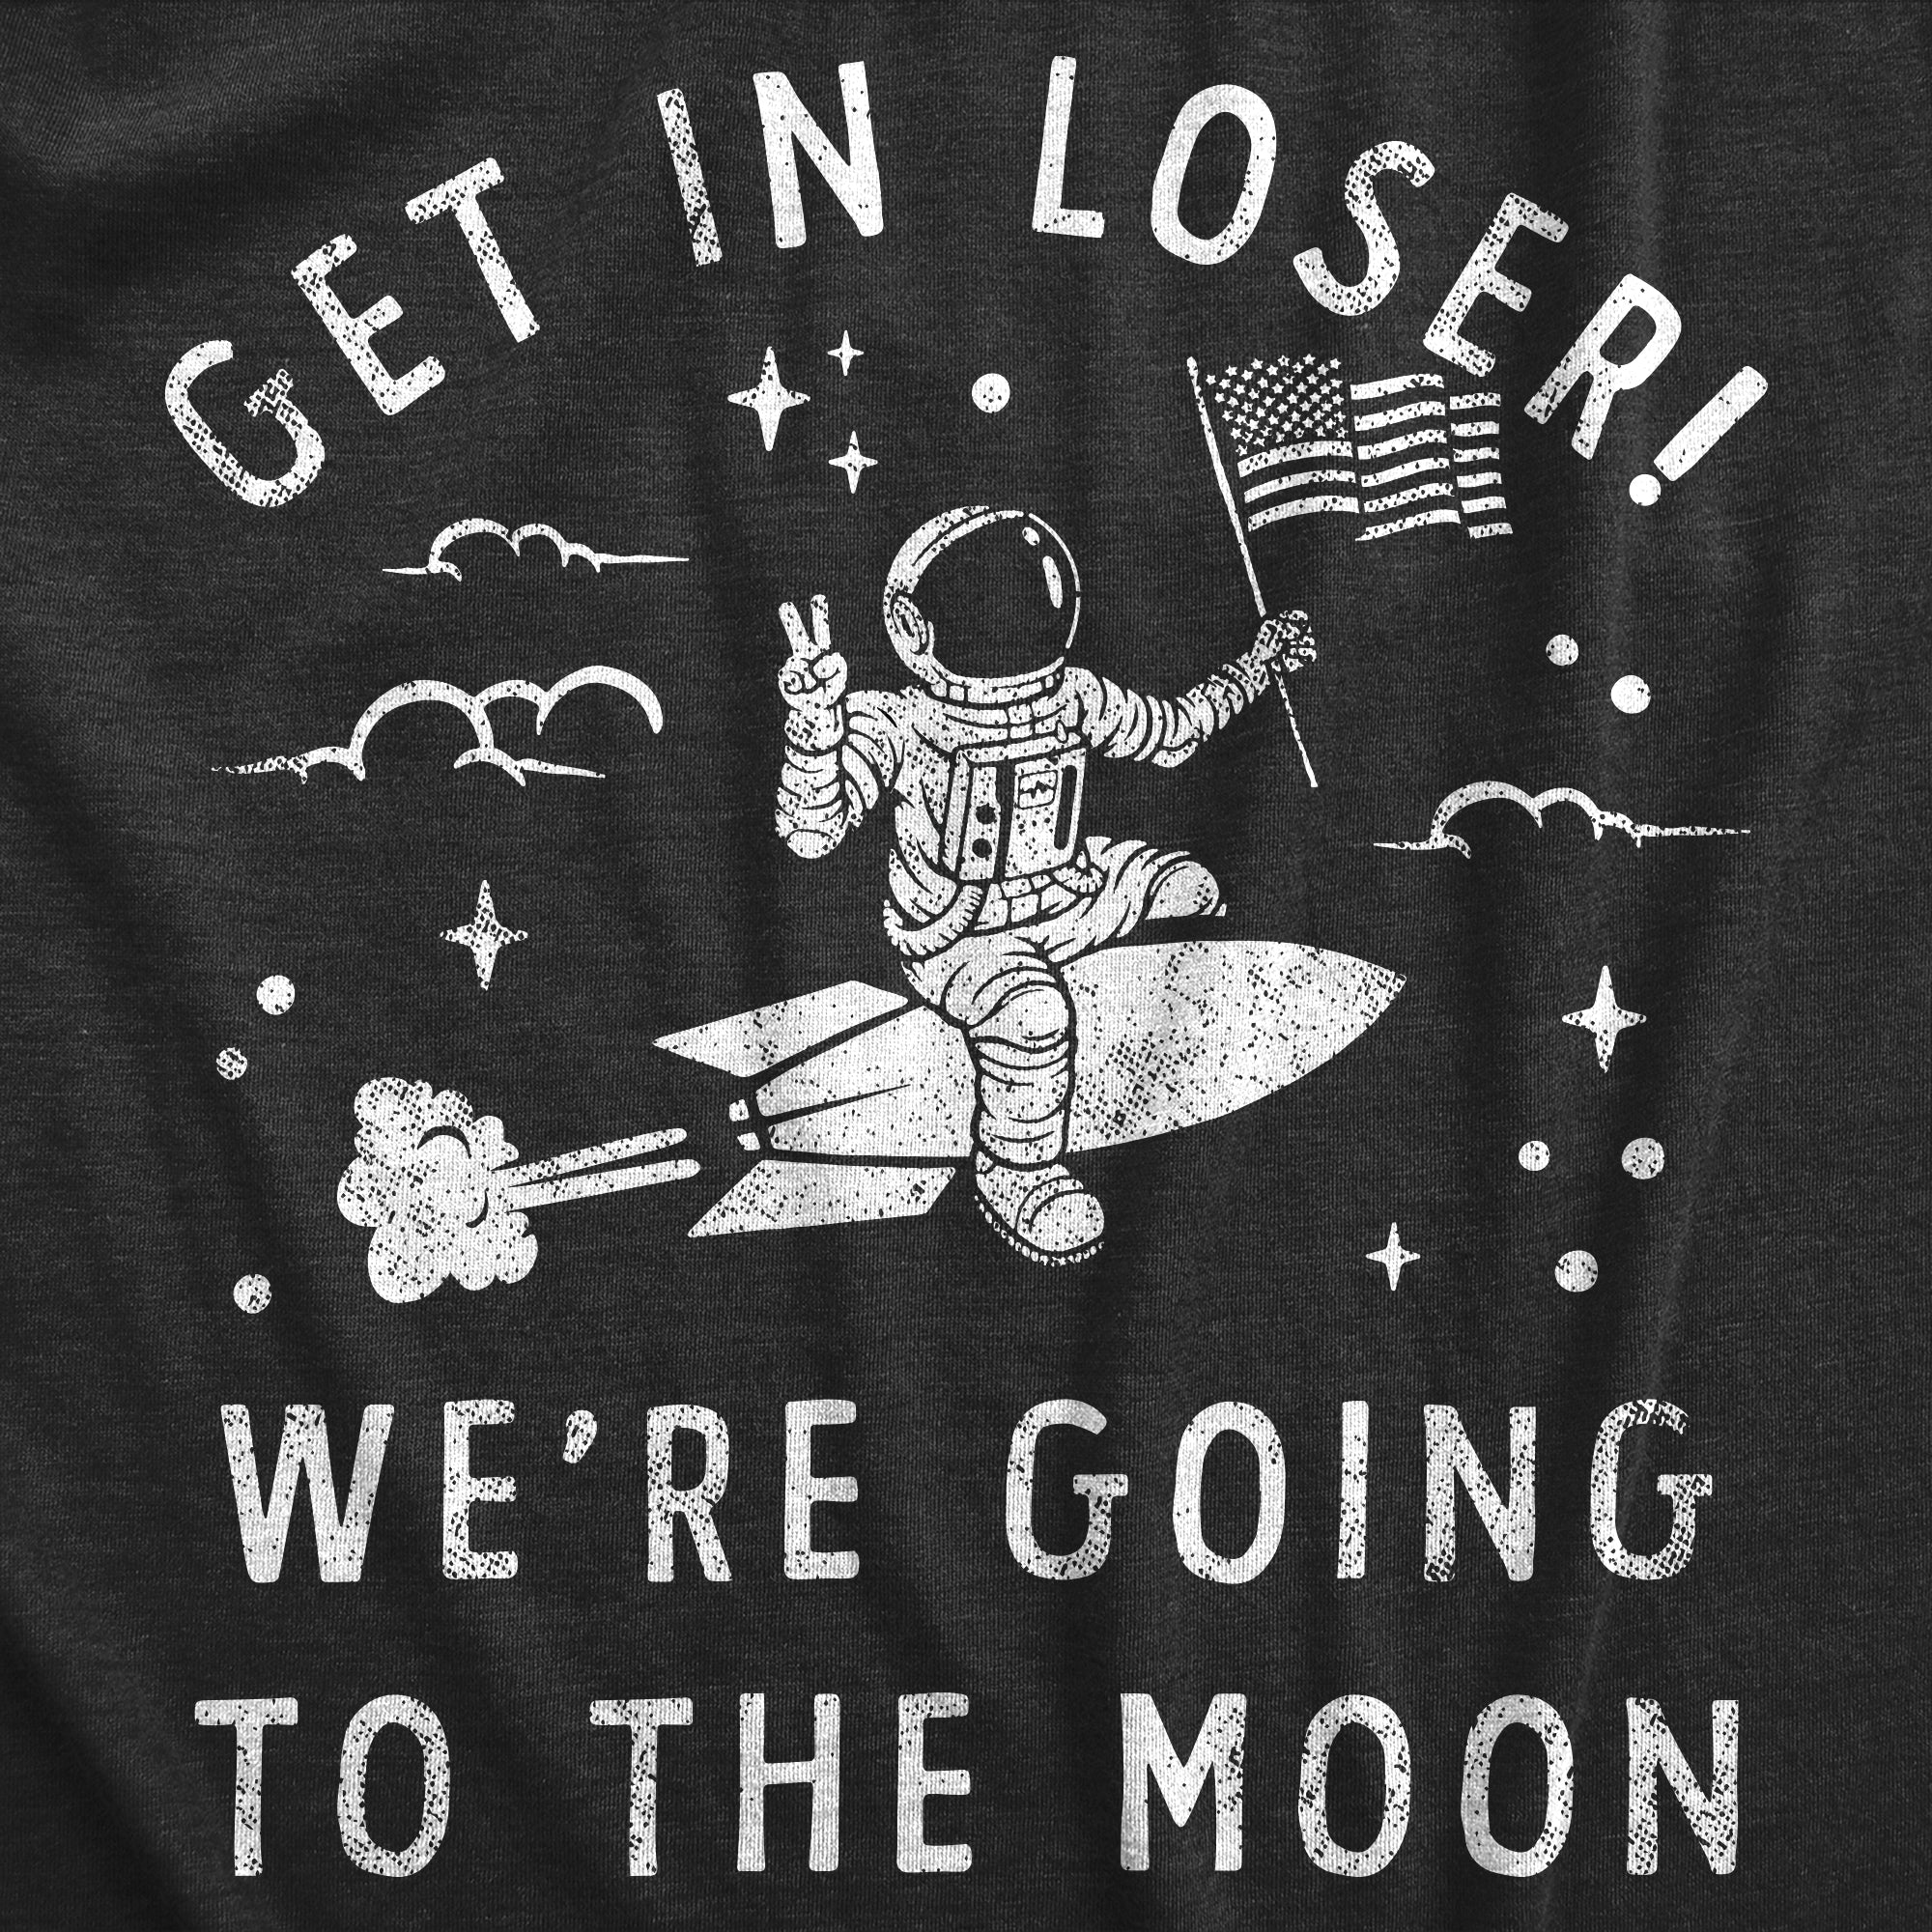 Funny Heather Black - MOON Get In Loser Were Going To The Moon Womens T Shirt Nerdy Space Sarcastic Tee